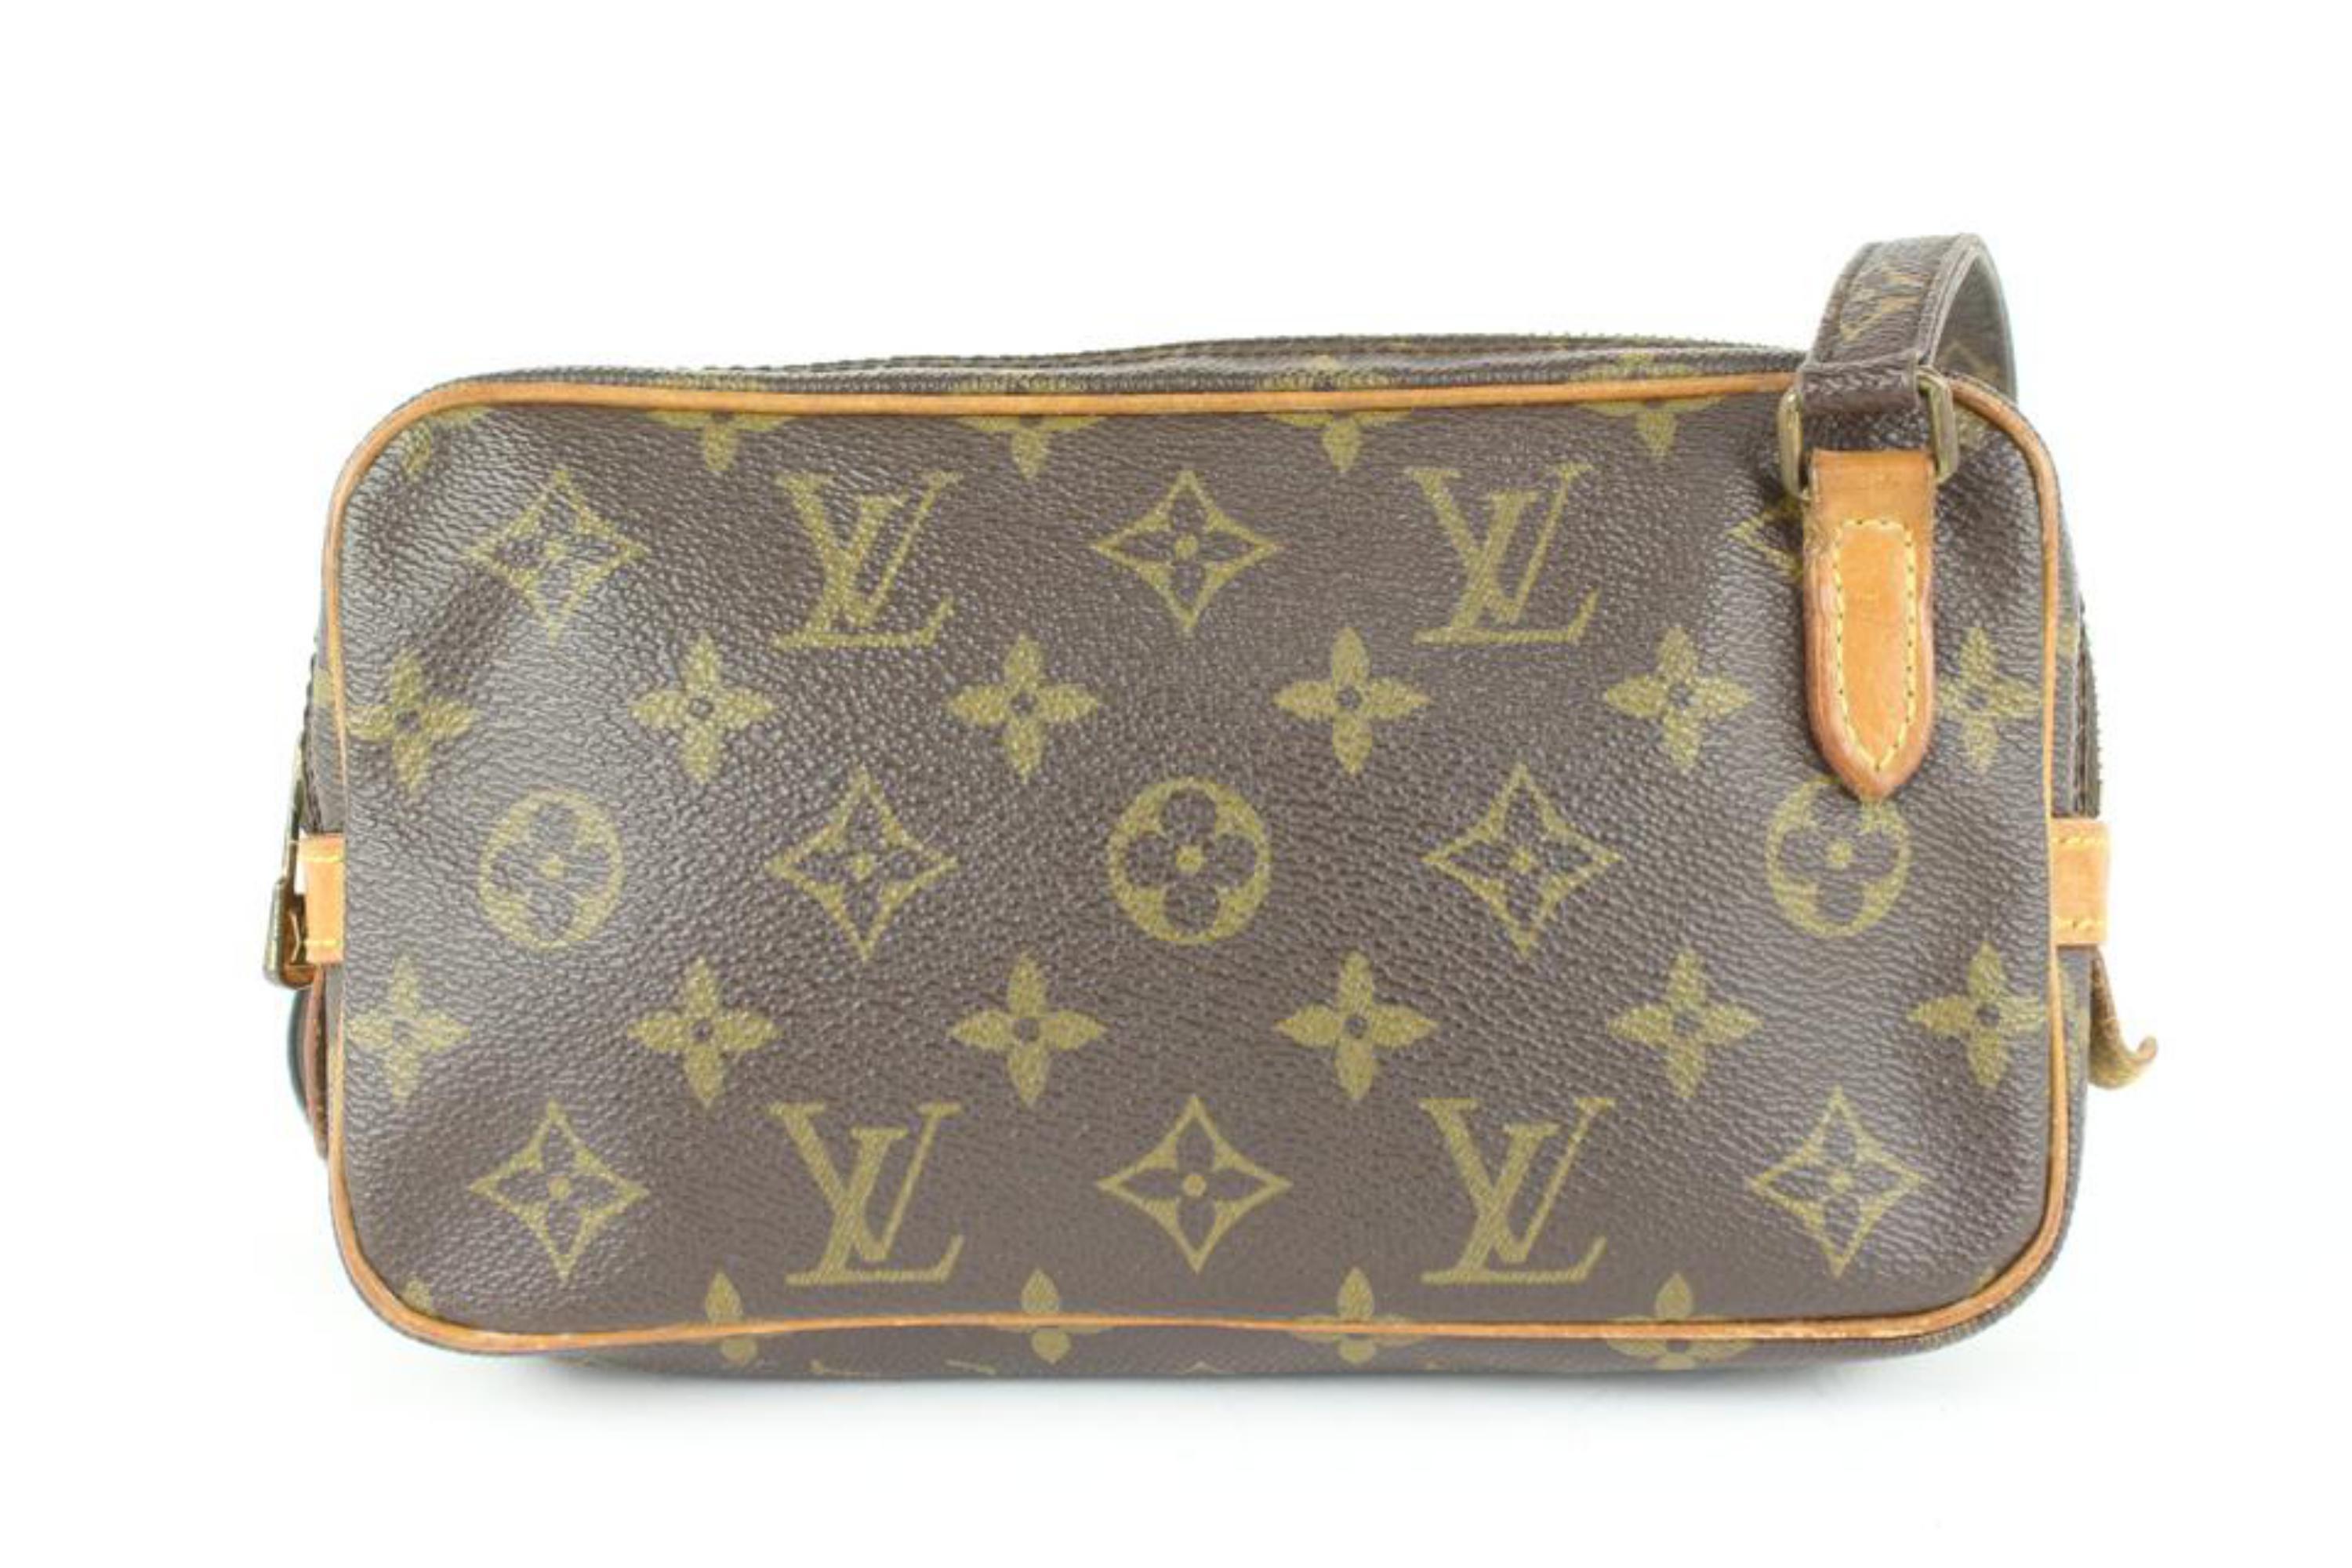 Louis Vuitton Monogram Pochette Marly Bandouliere Crossbody Bag 107lv31 In Fair Condition For Sale In Dix hills, NY